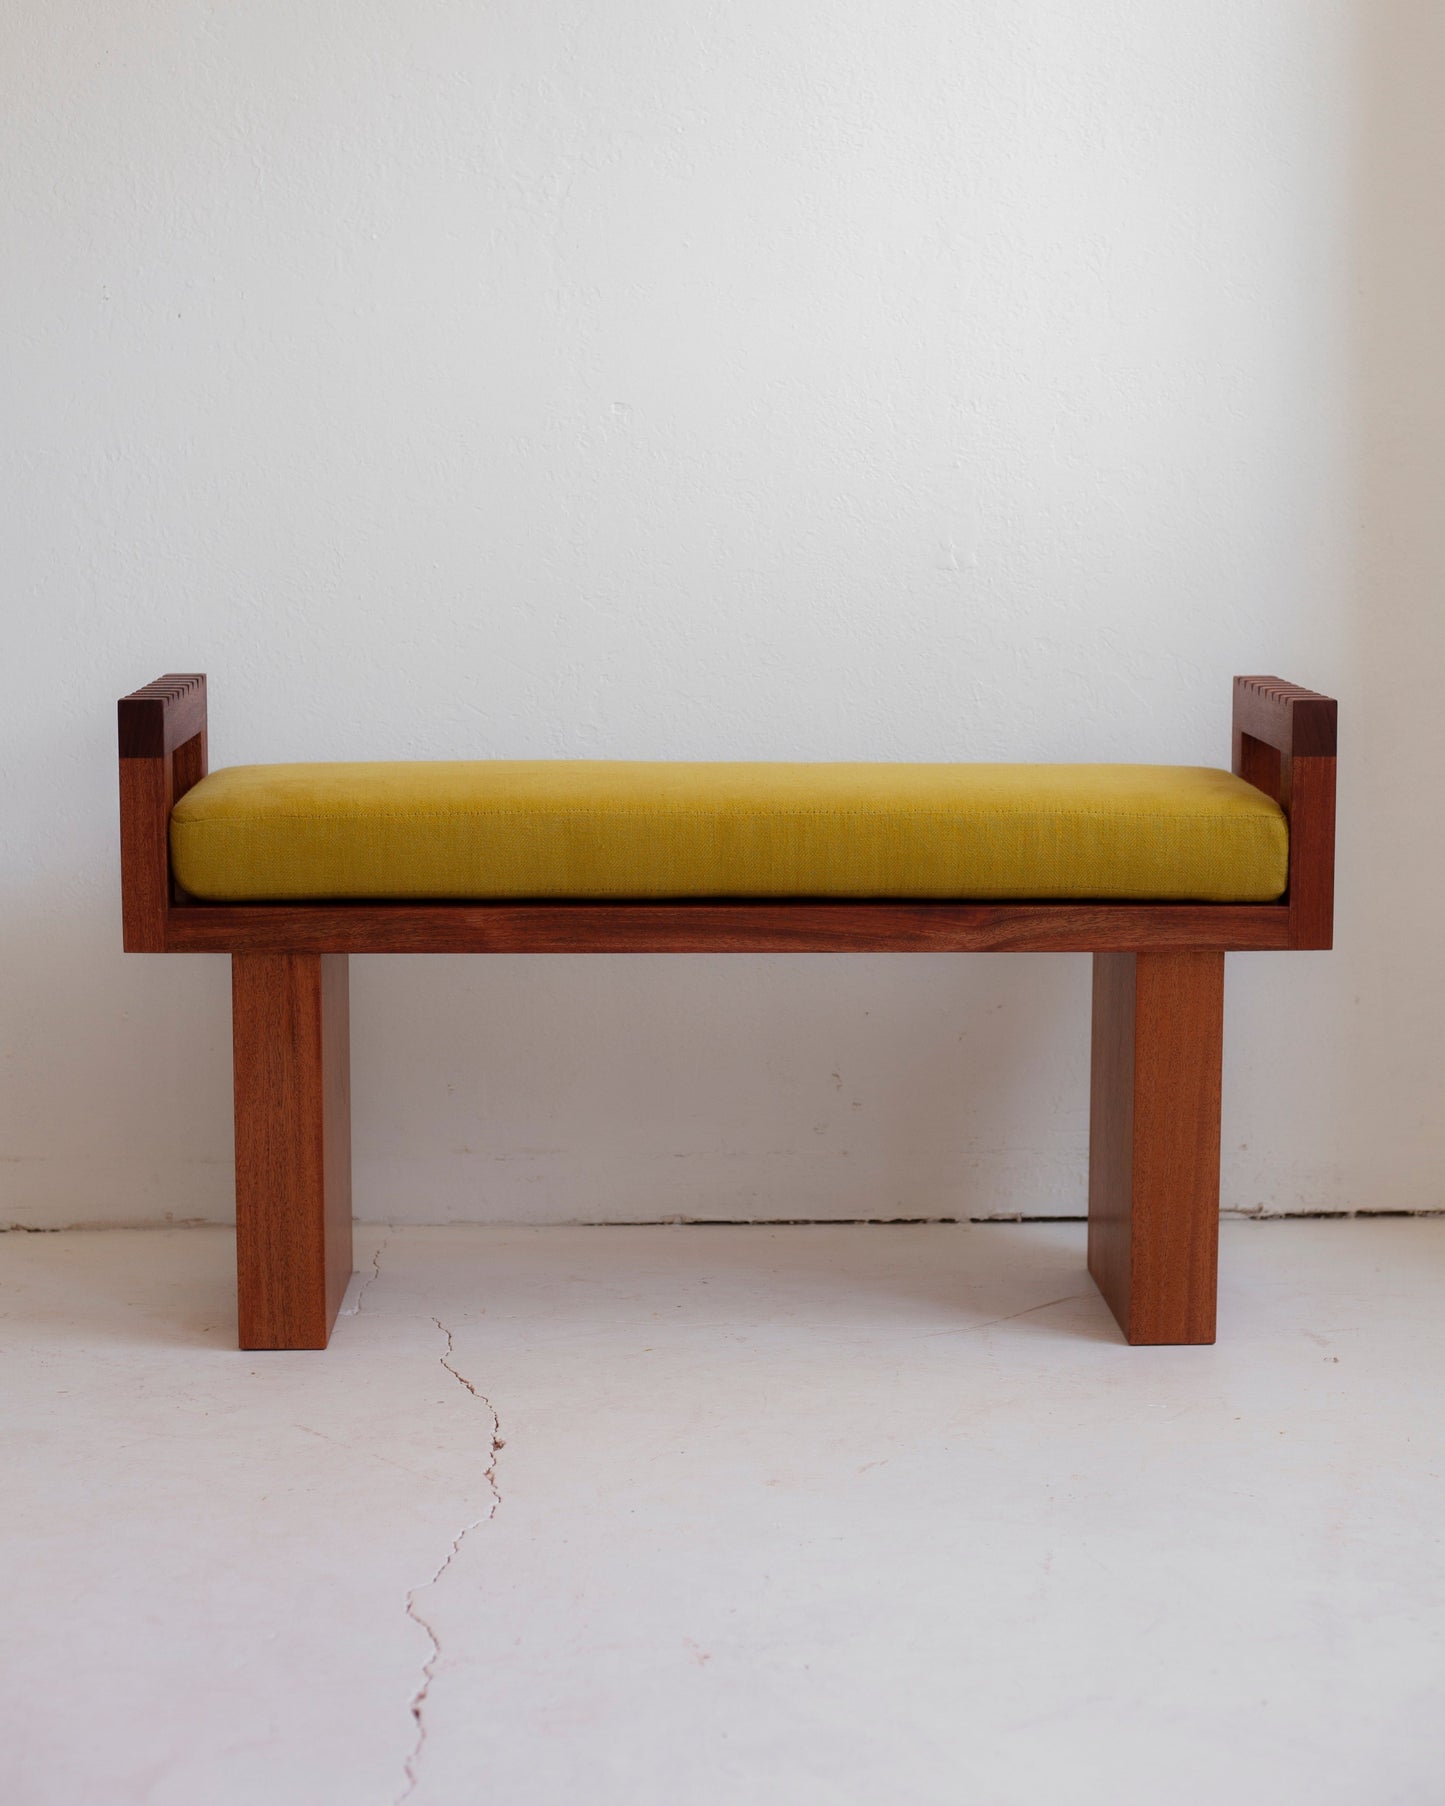 Bench by CFP Benches